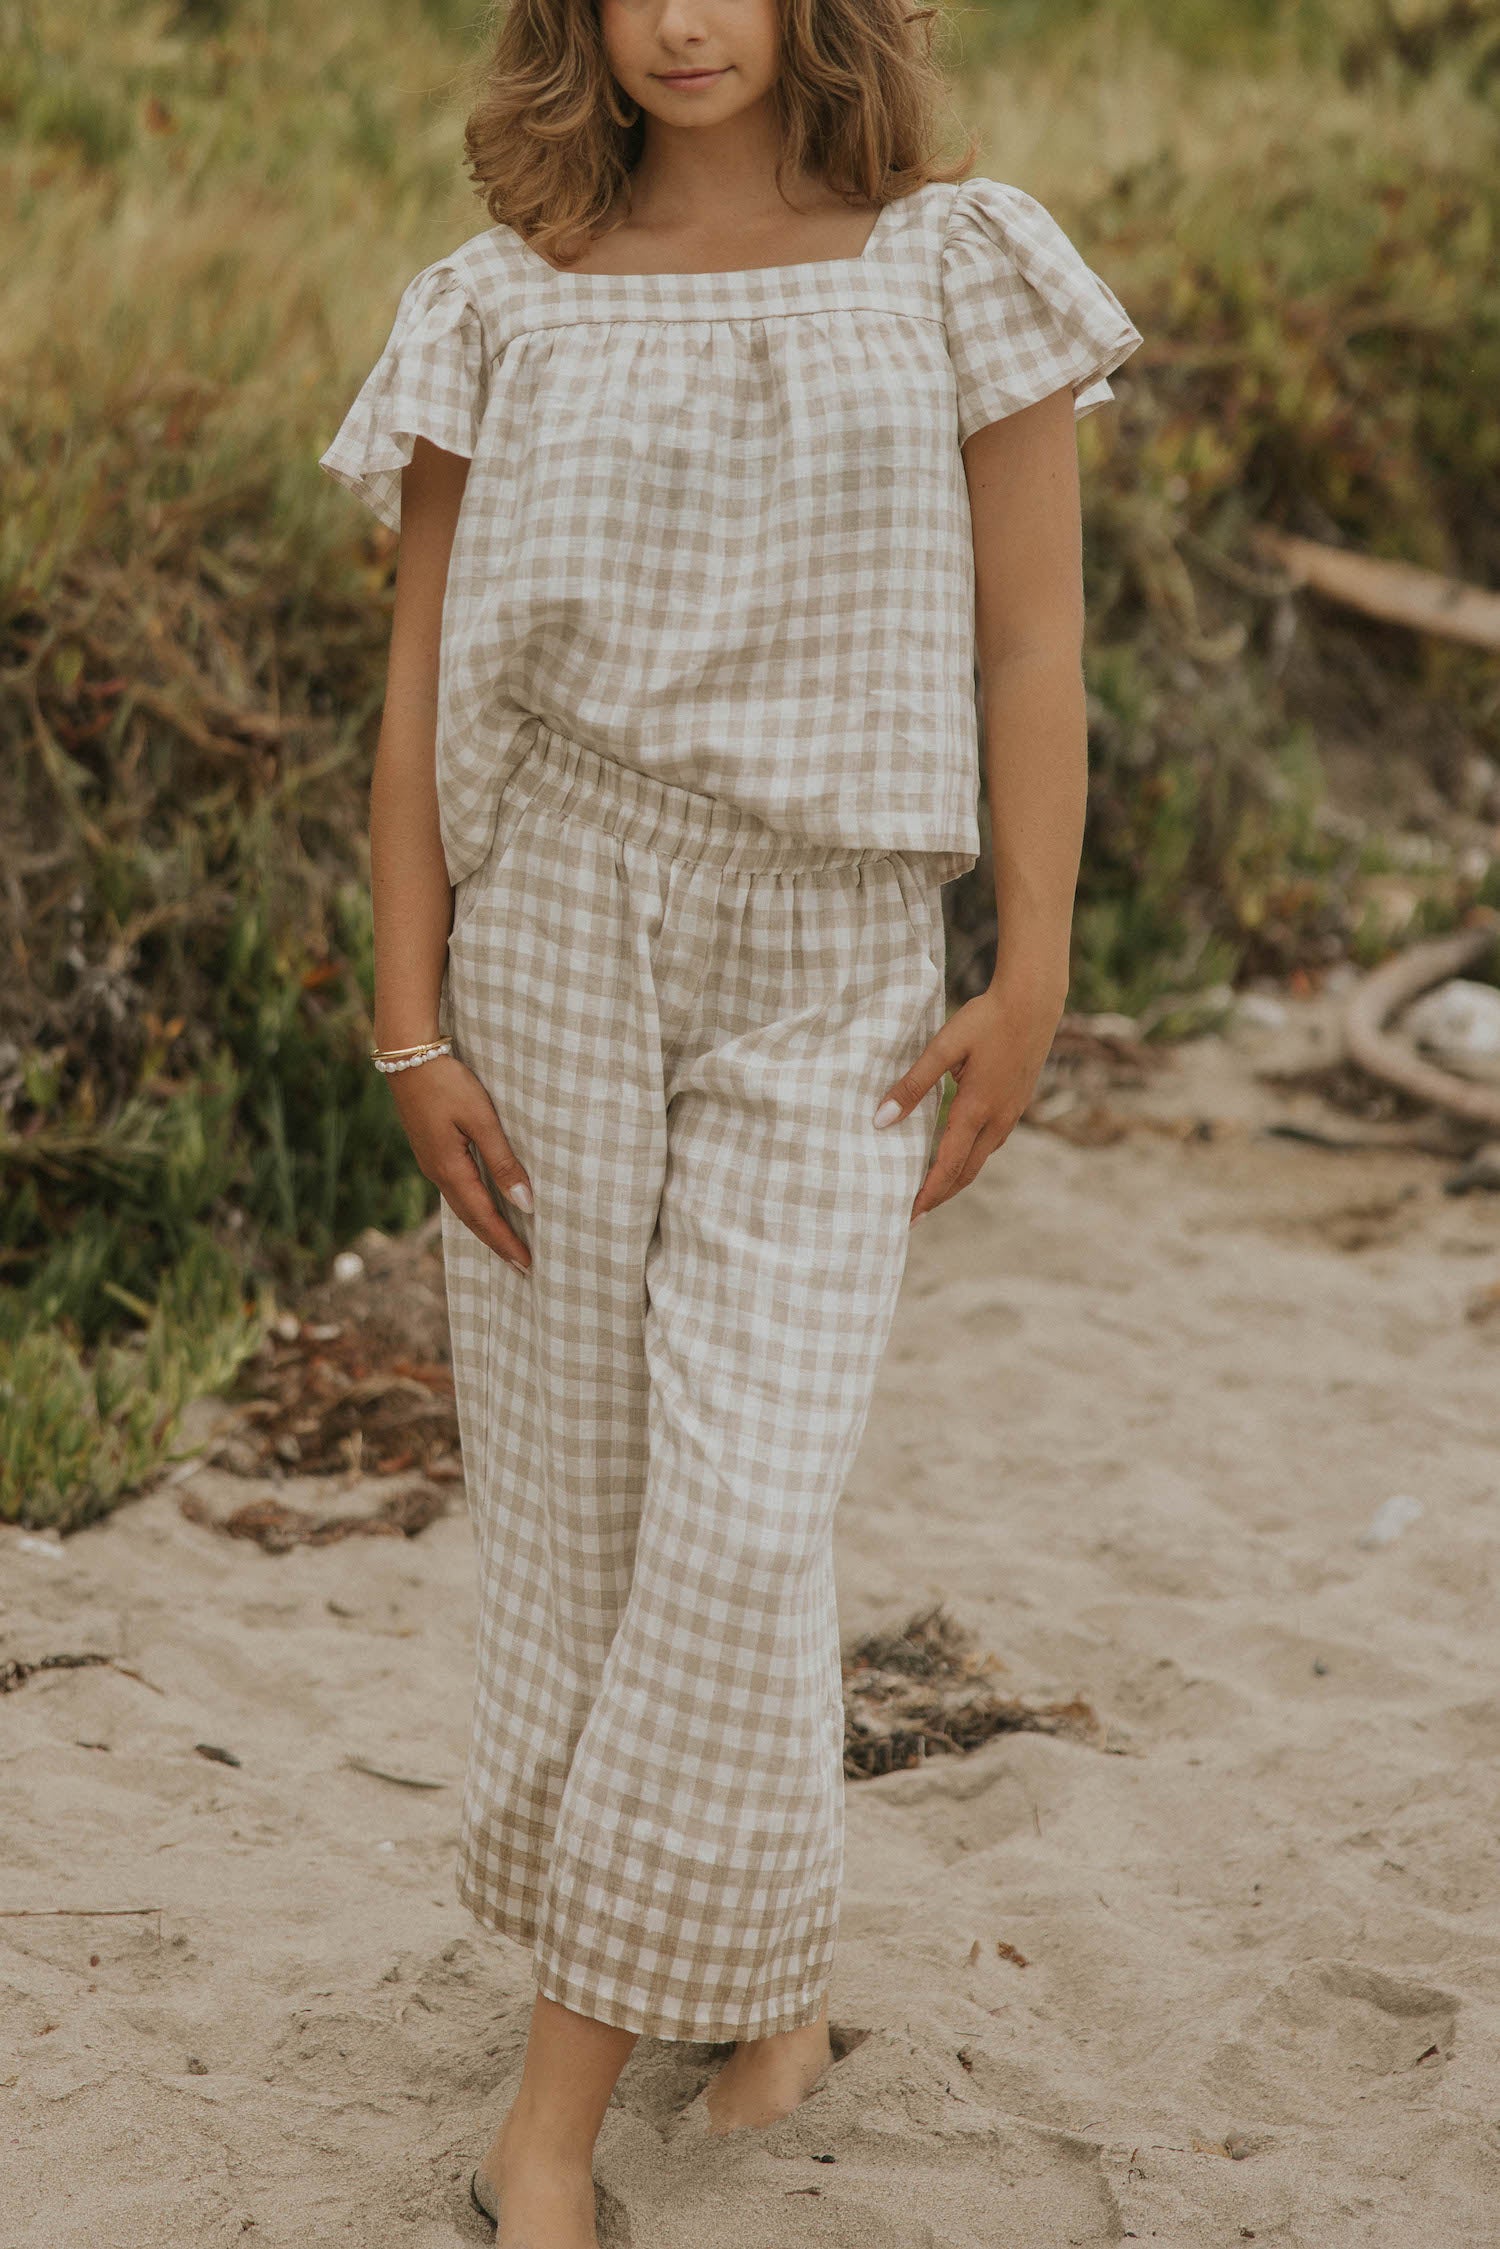 Matching loungewear set for women in a neutral checkered print.